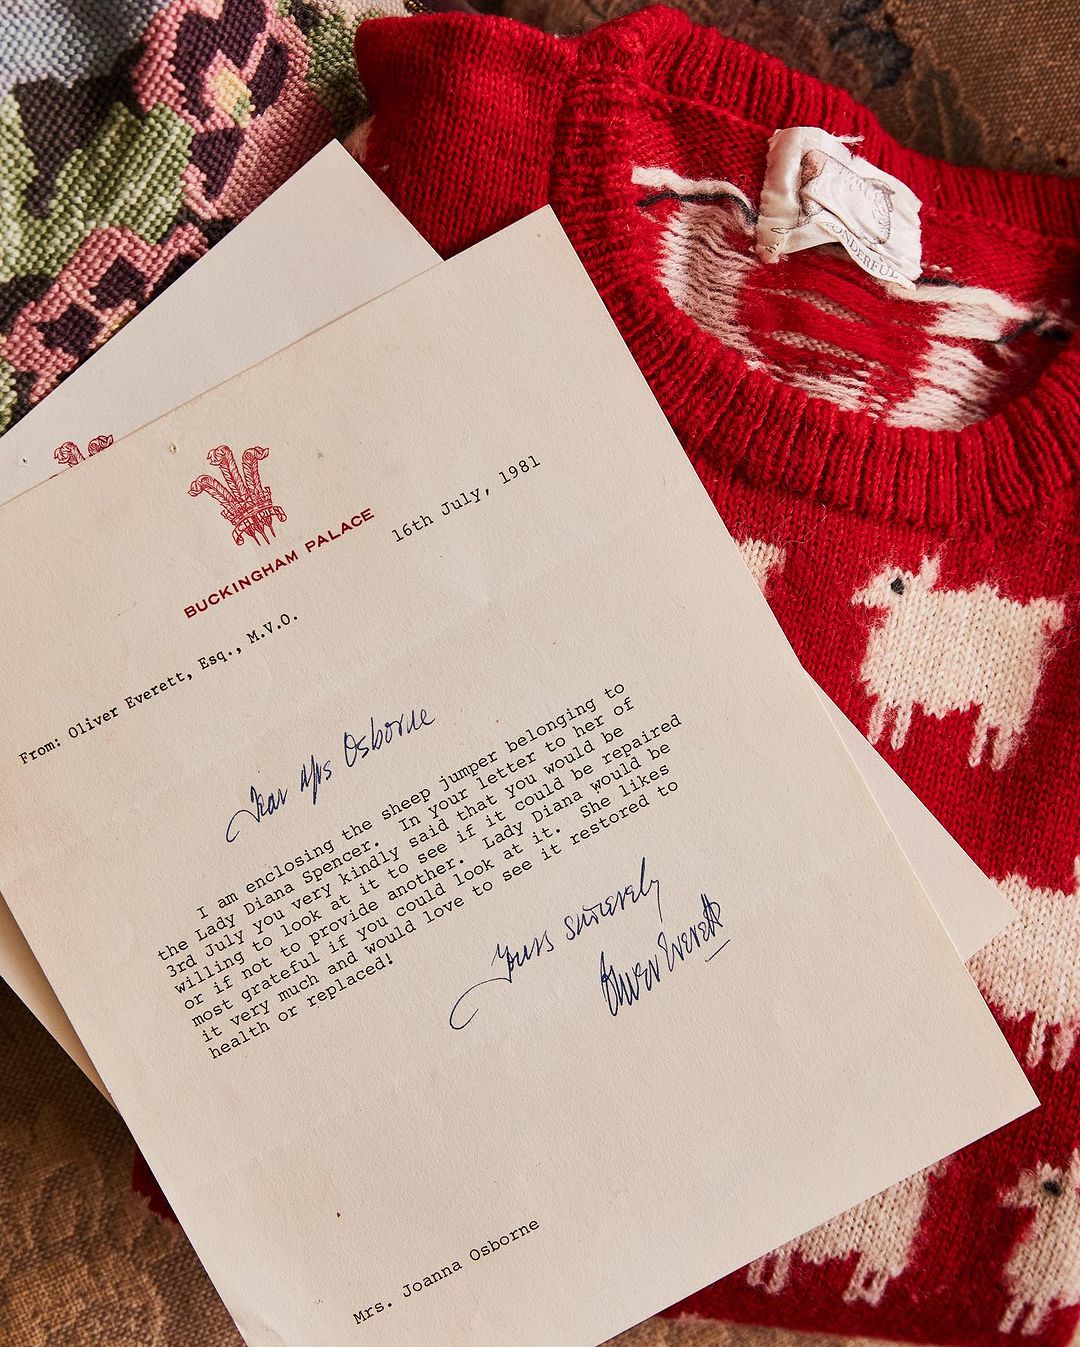 Original correspondences between Buckingham Palace and Warm & Wonderful are included with the auction lot